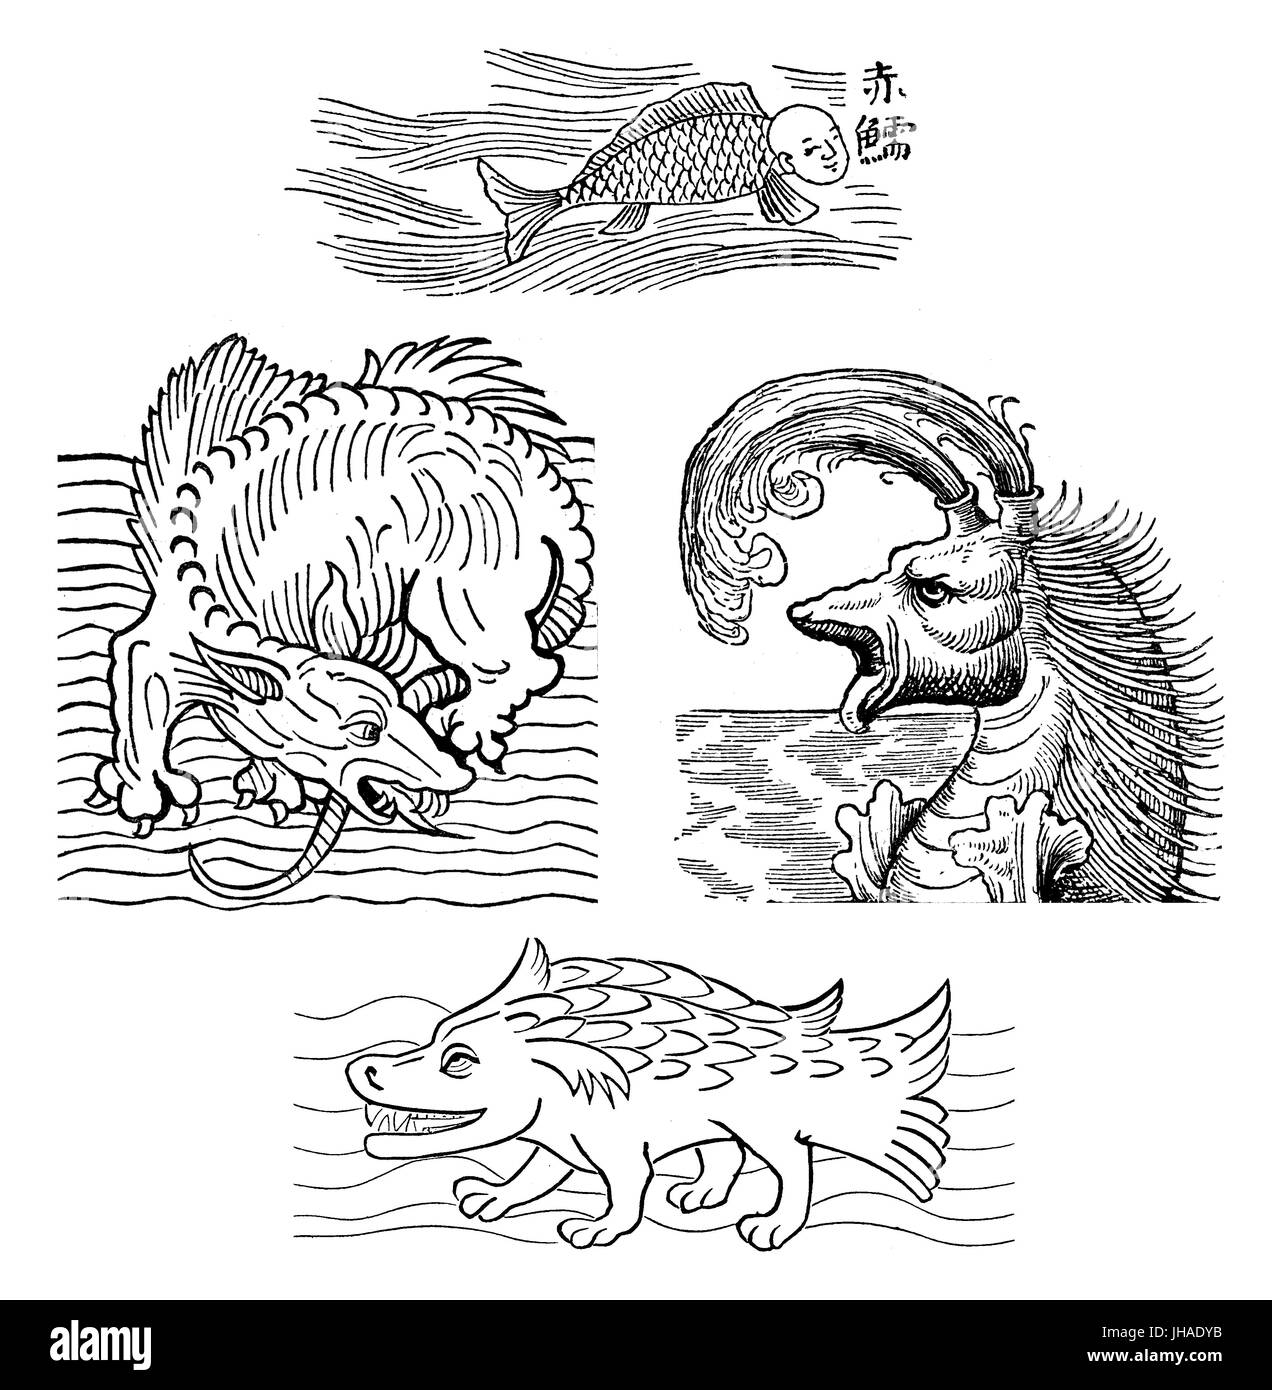 Mythical sea monters, medieval engraving Stock Photo